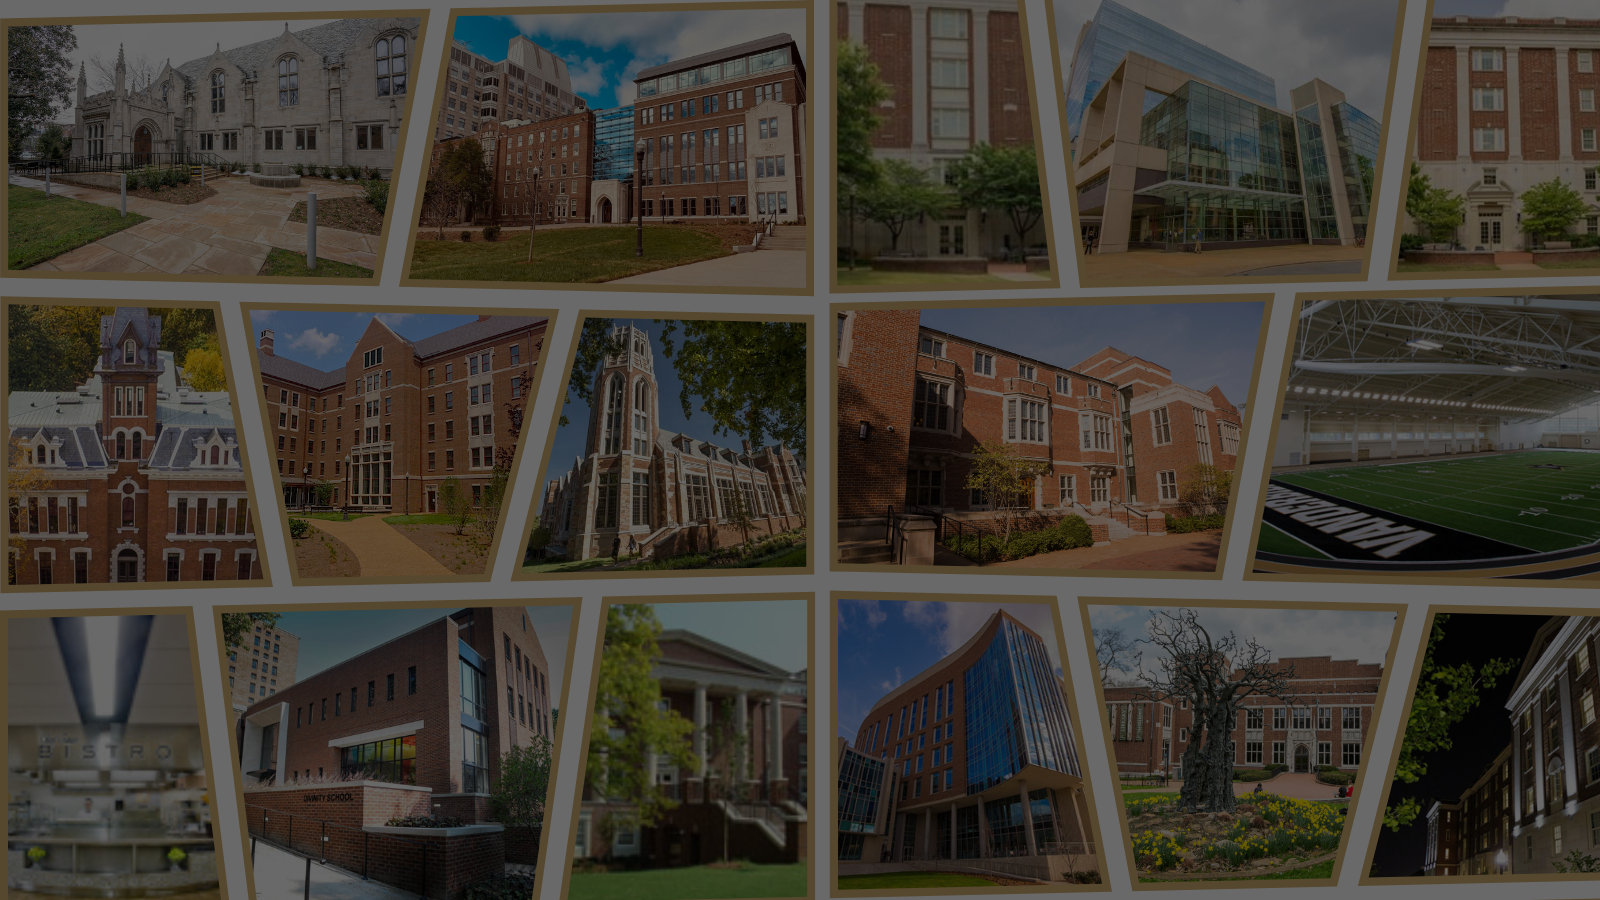 16 sustainable buildings on campus in a collage